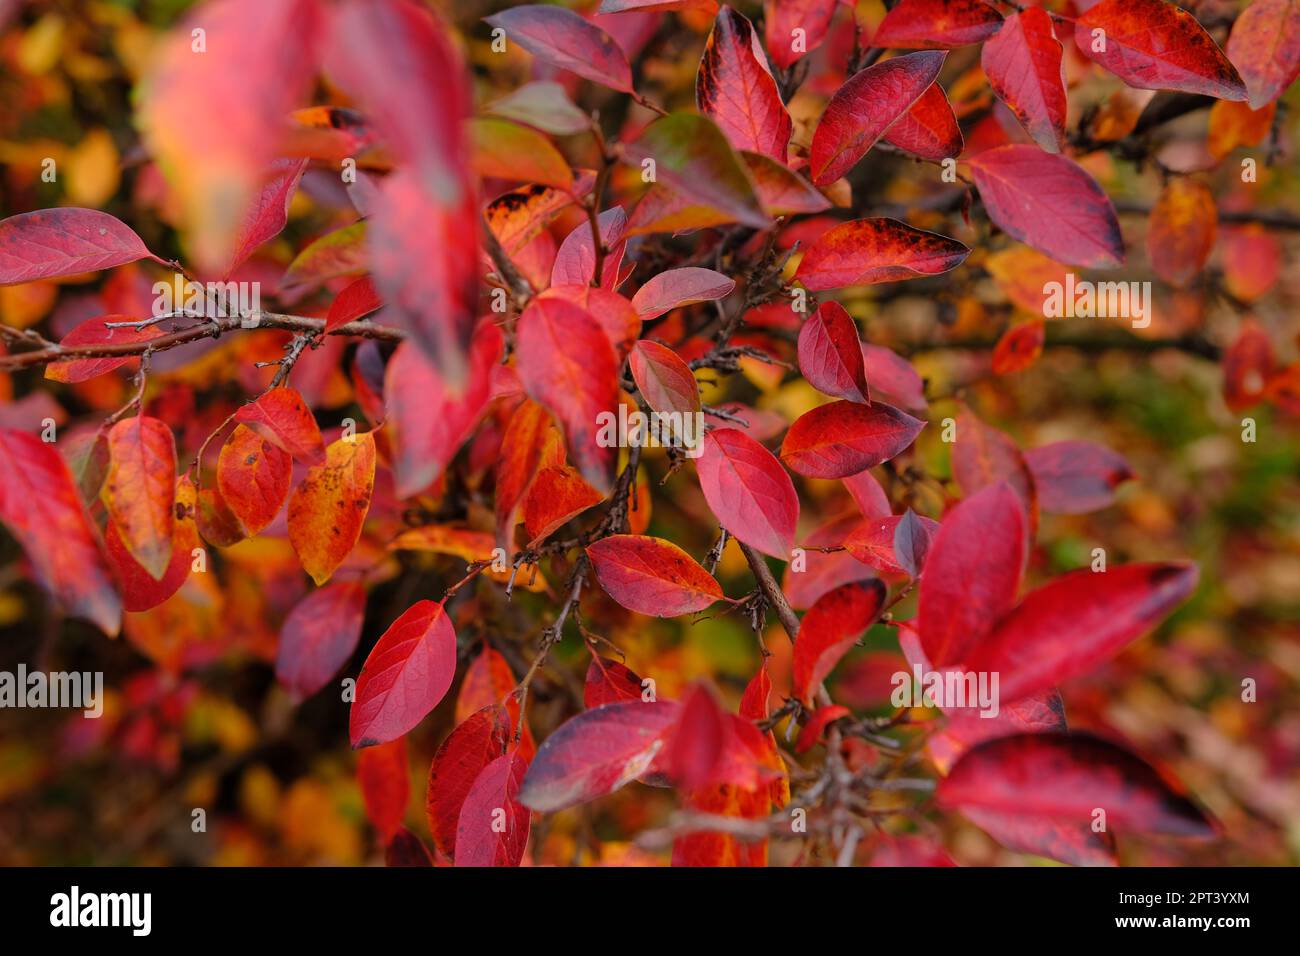 Colorful autumnal background with red leaves close up. Multicolored foliage Cotoneaster lucidus in forest. Autumn concept. Stock Photo